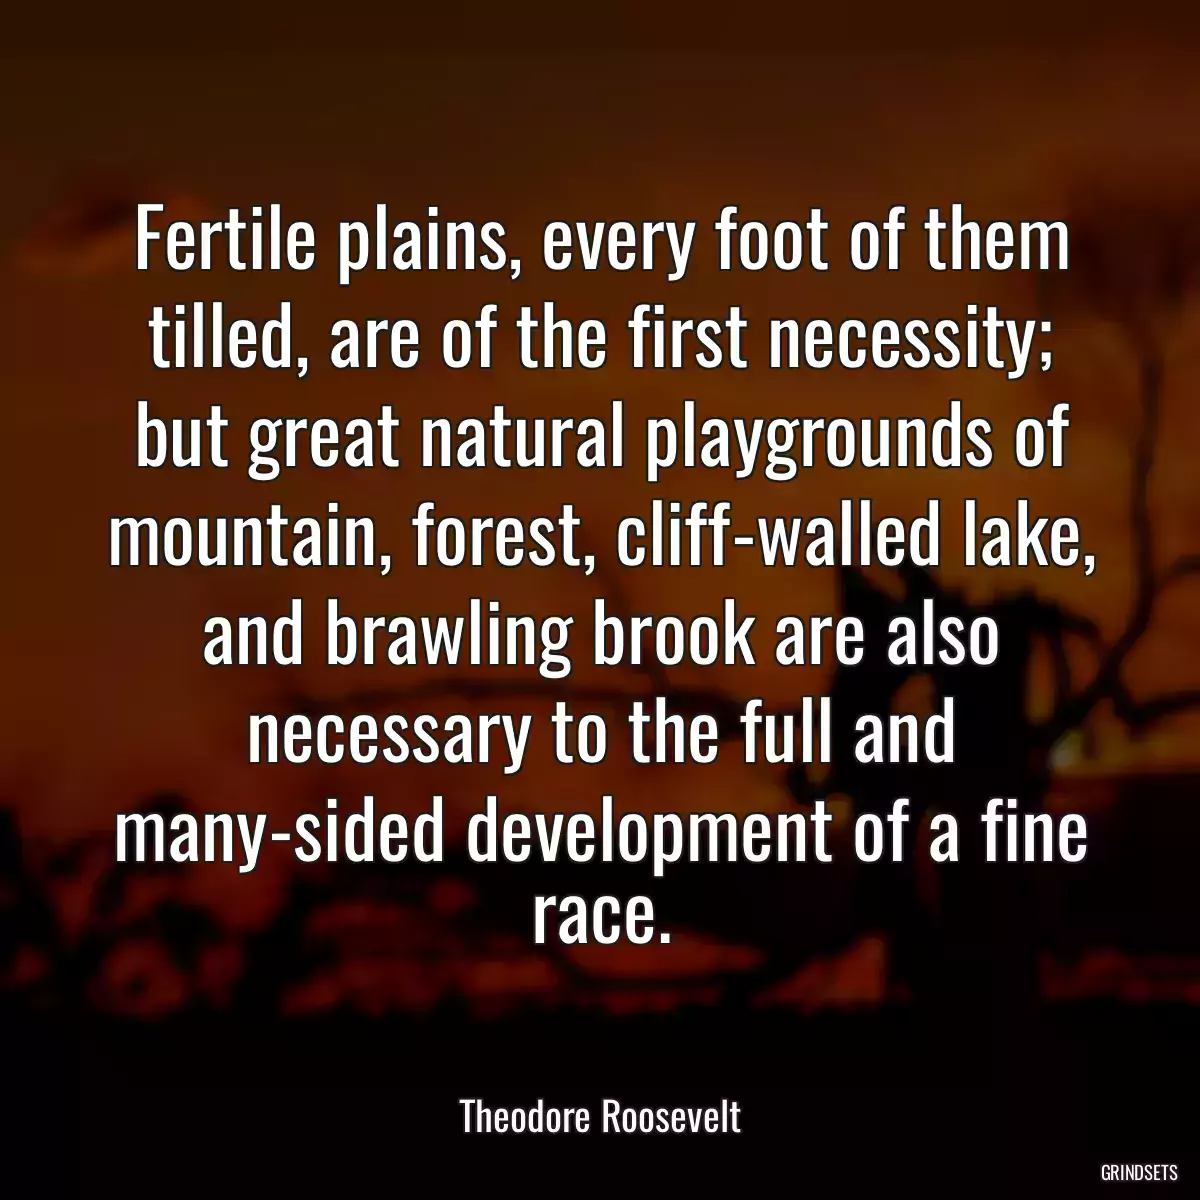 Fertile plains, every foot of them tilled, are of the first necessity; but great natural playgrounds of mountain, forest, cliff-walled lake, and brawling brook are also necessary to the full and many-sided development of a fine race.